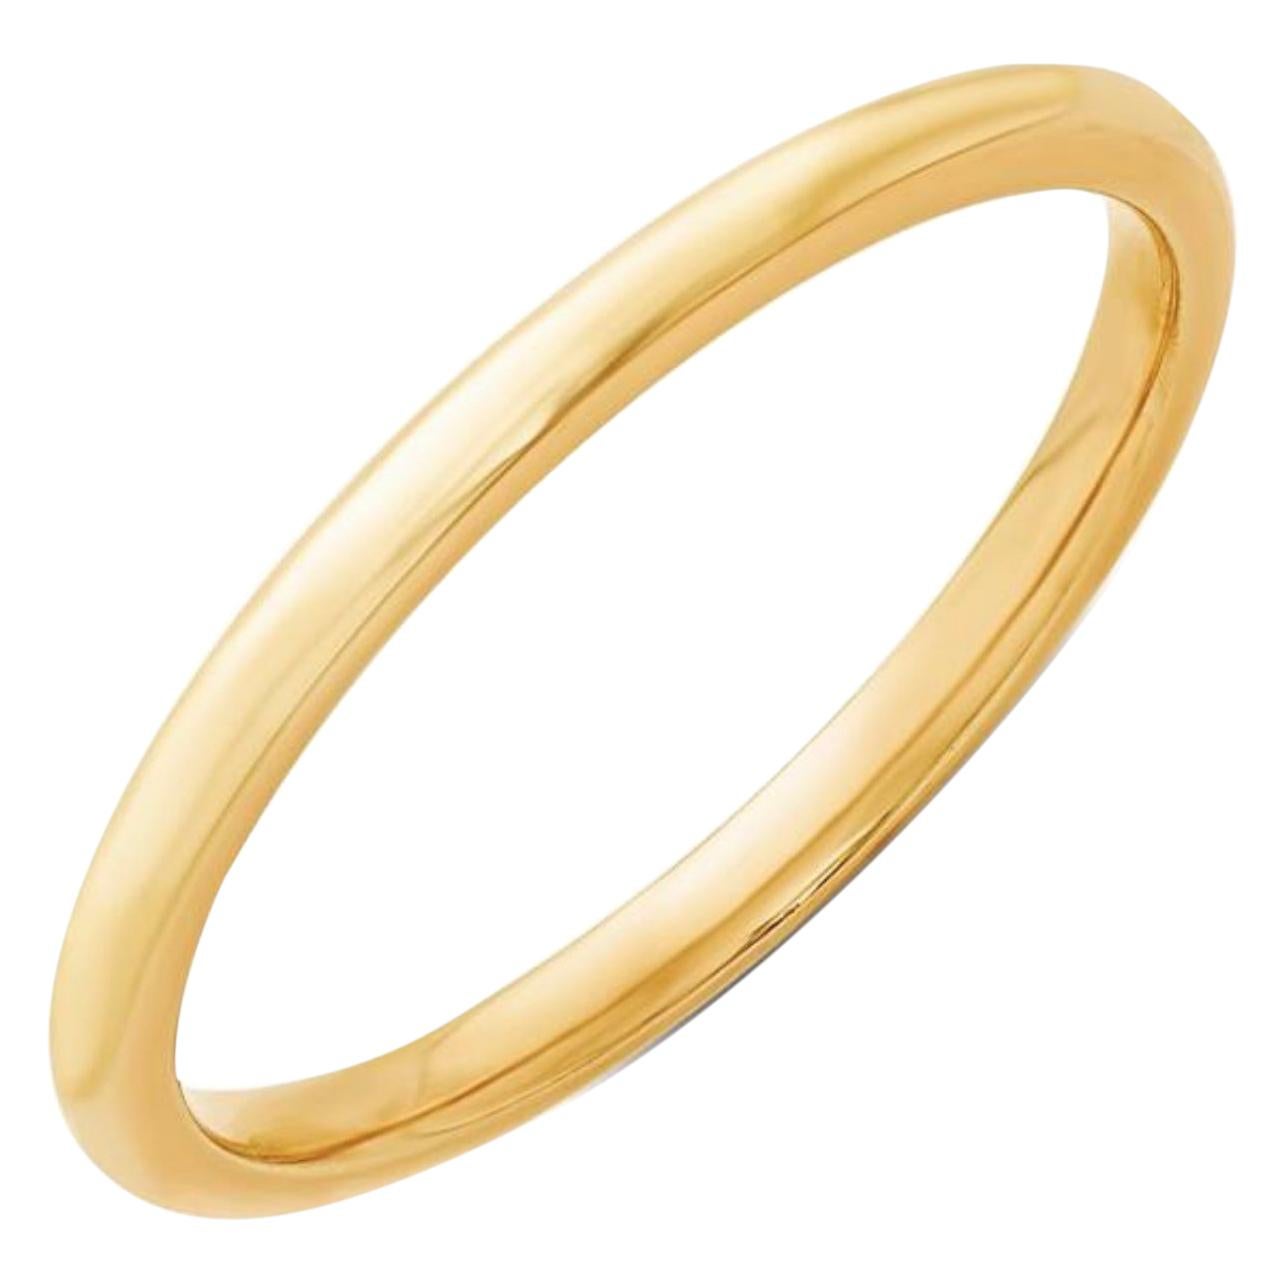 
 14 Karat Yellow Gold Half Round Classic Wedding Band Solid Ring Size 8
This timeless style adds a Light classic  band. Quality craftsmanship makes this long lasting band a great value. rounded inside edge for increased comfort.
High Polish
Unisex 